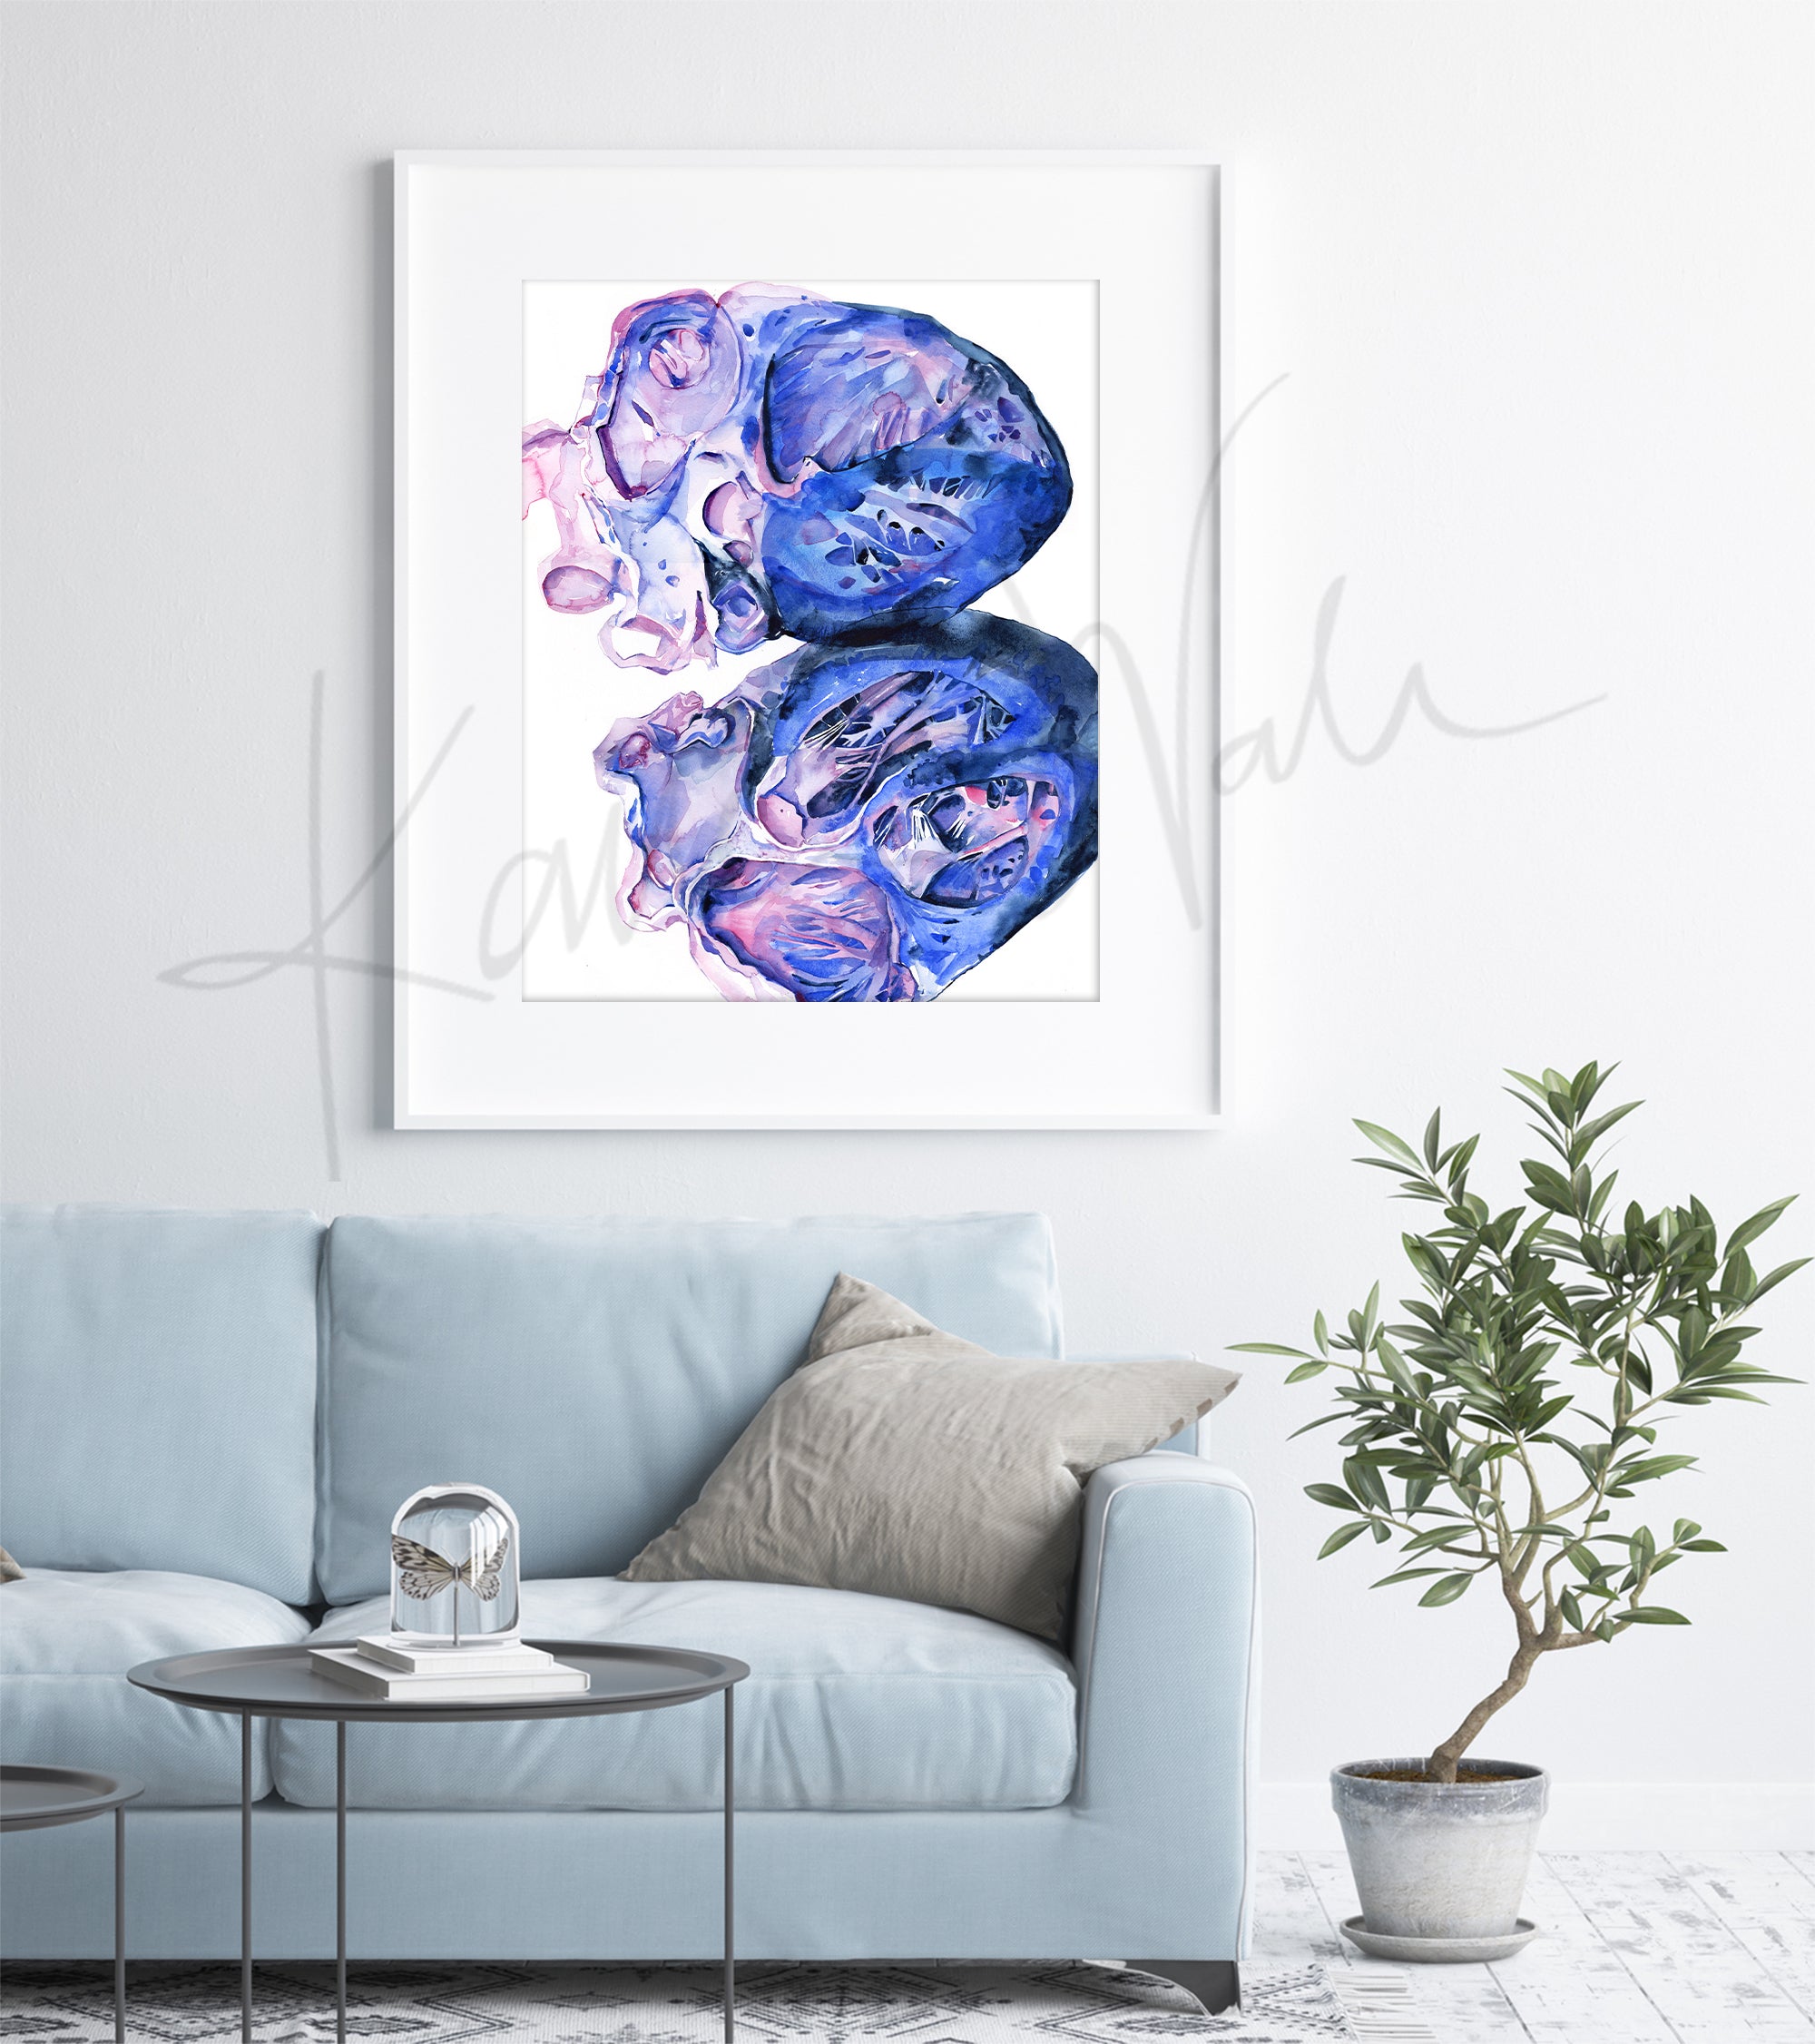 Framed watercolor painting of a heart dissection in pinks, purples, and vibrant blues. The painting is hanging over a blue couch.